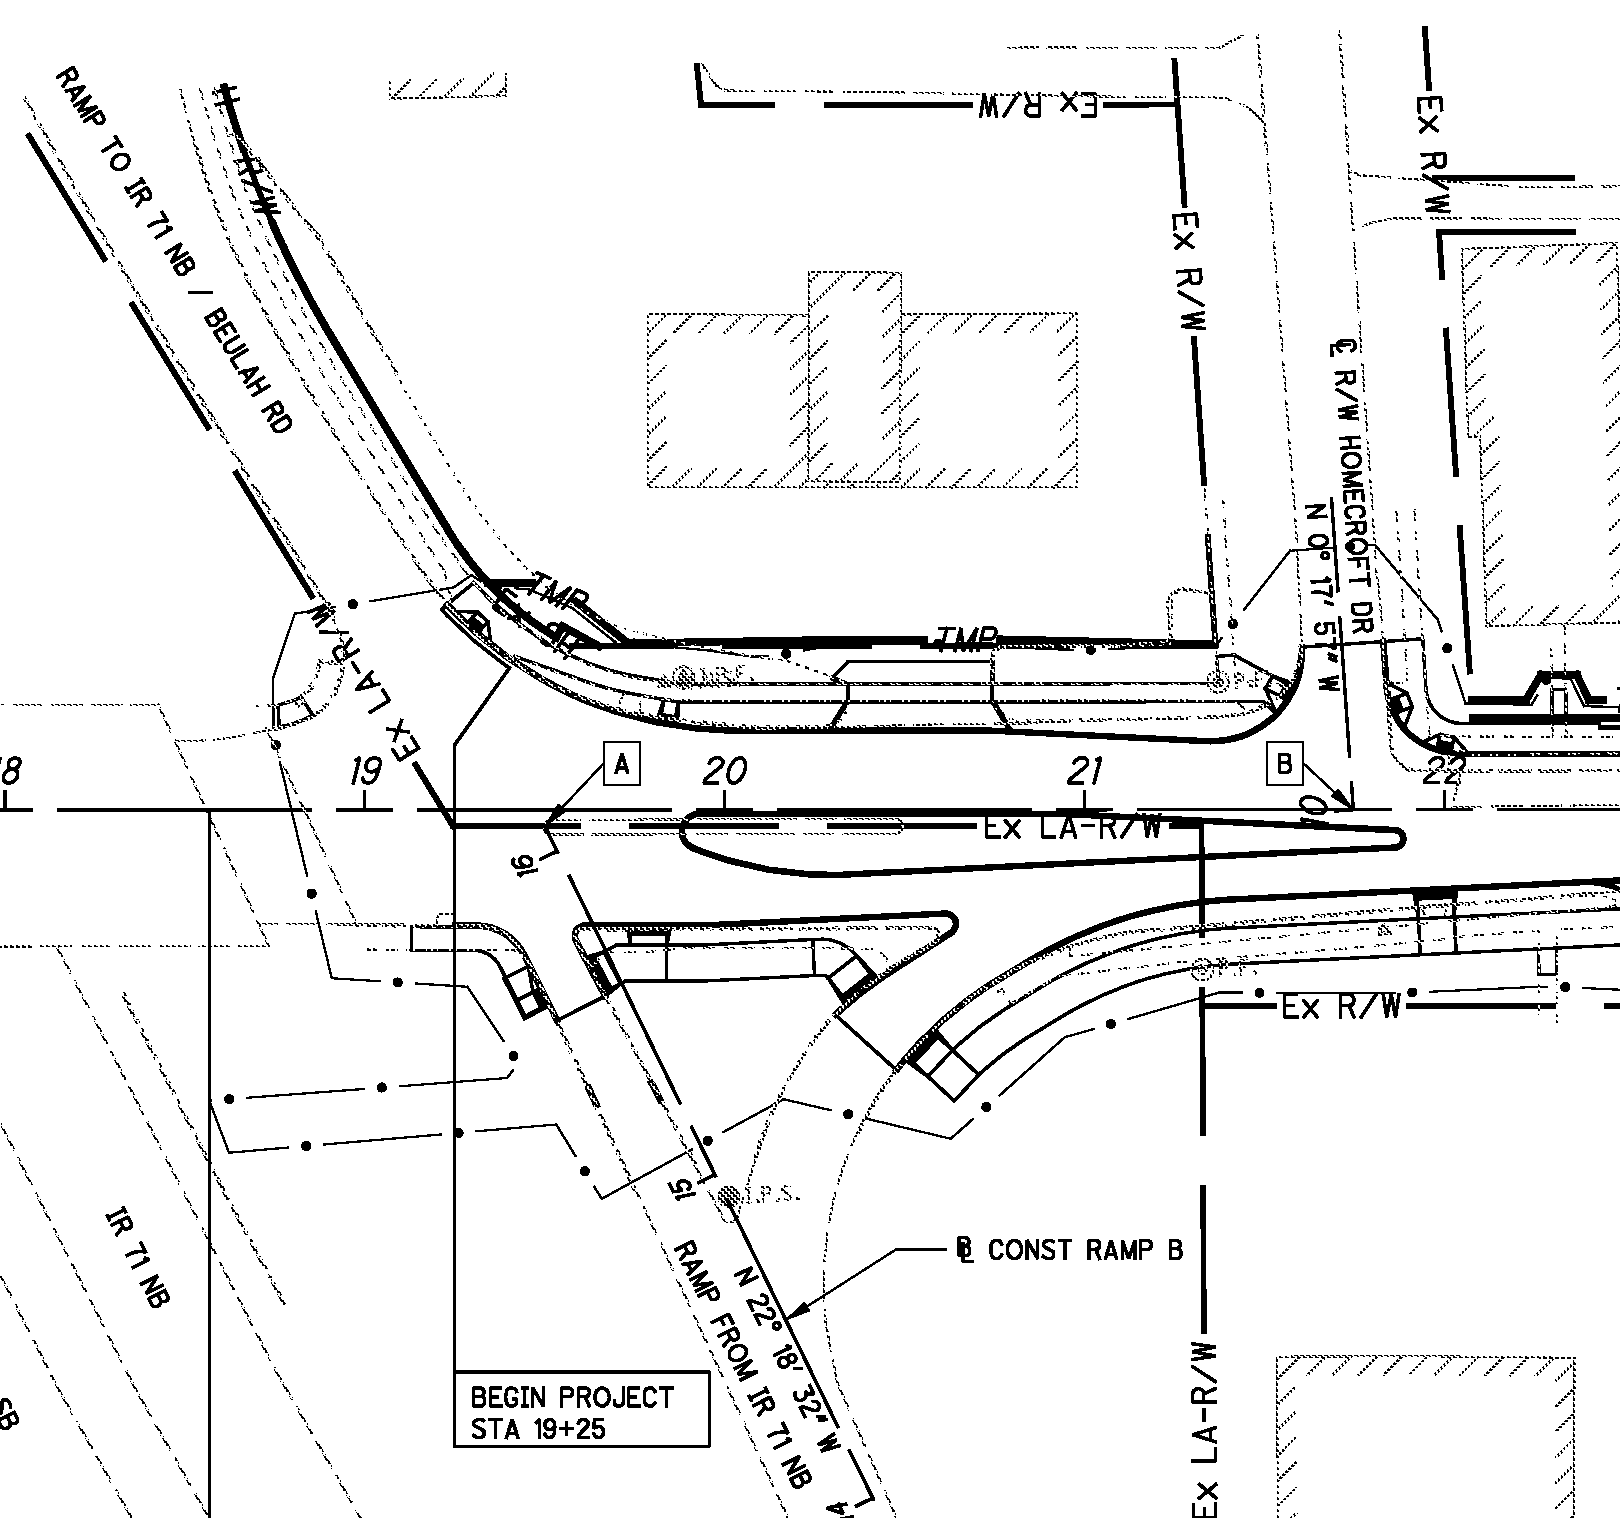 An outline of the intersection of Hudson Street at the I-71 Northbound ramp, the Shell station, and the intersection with Homecroft Drive. The concrete median between the two sides of Hudson has grown bigger, narrowing eastbound Hudson to one lane with no space for passing, and blocking left turns from eastbound Hudson onto Homecroft.